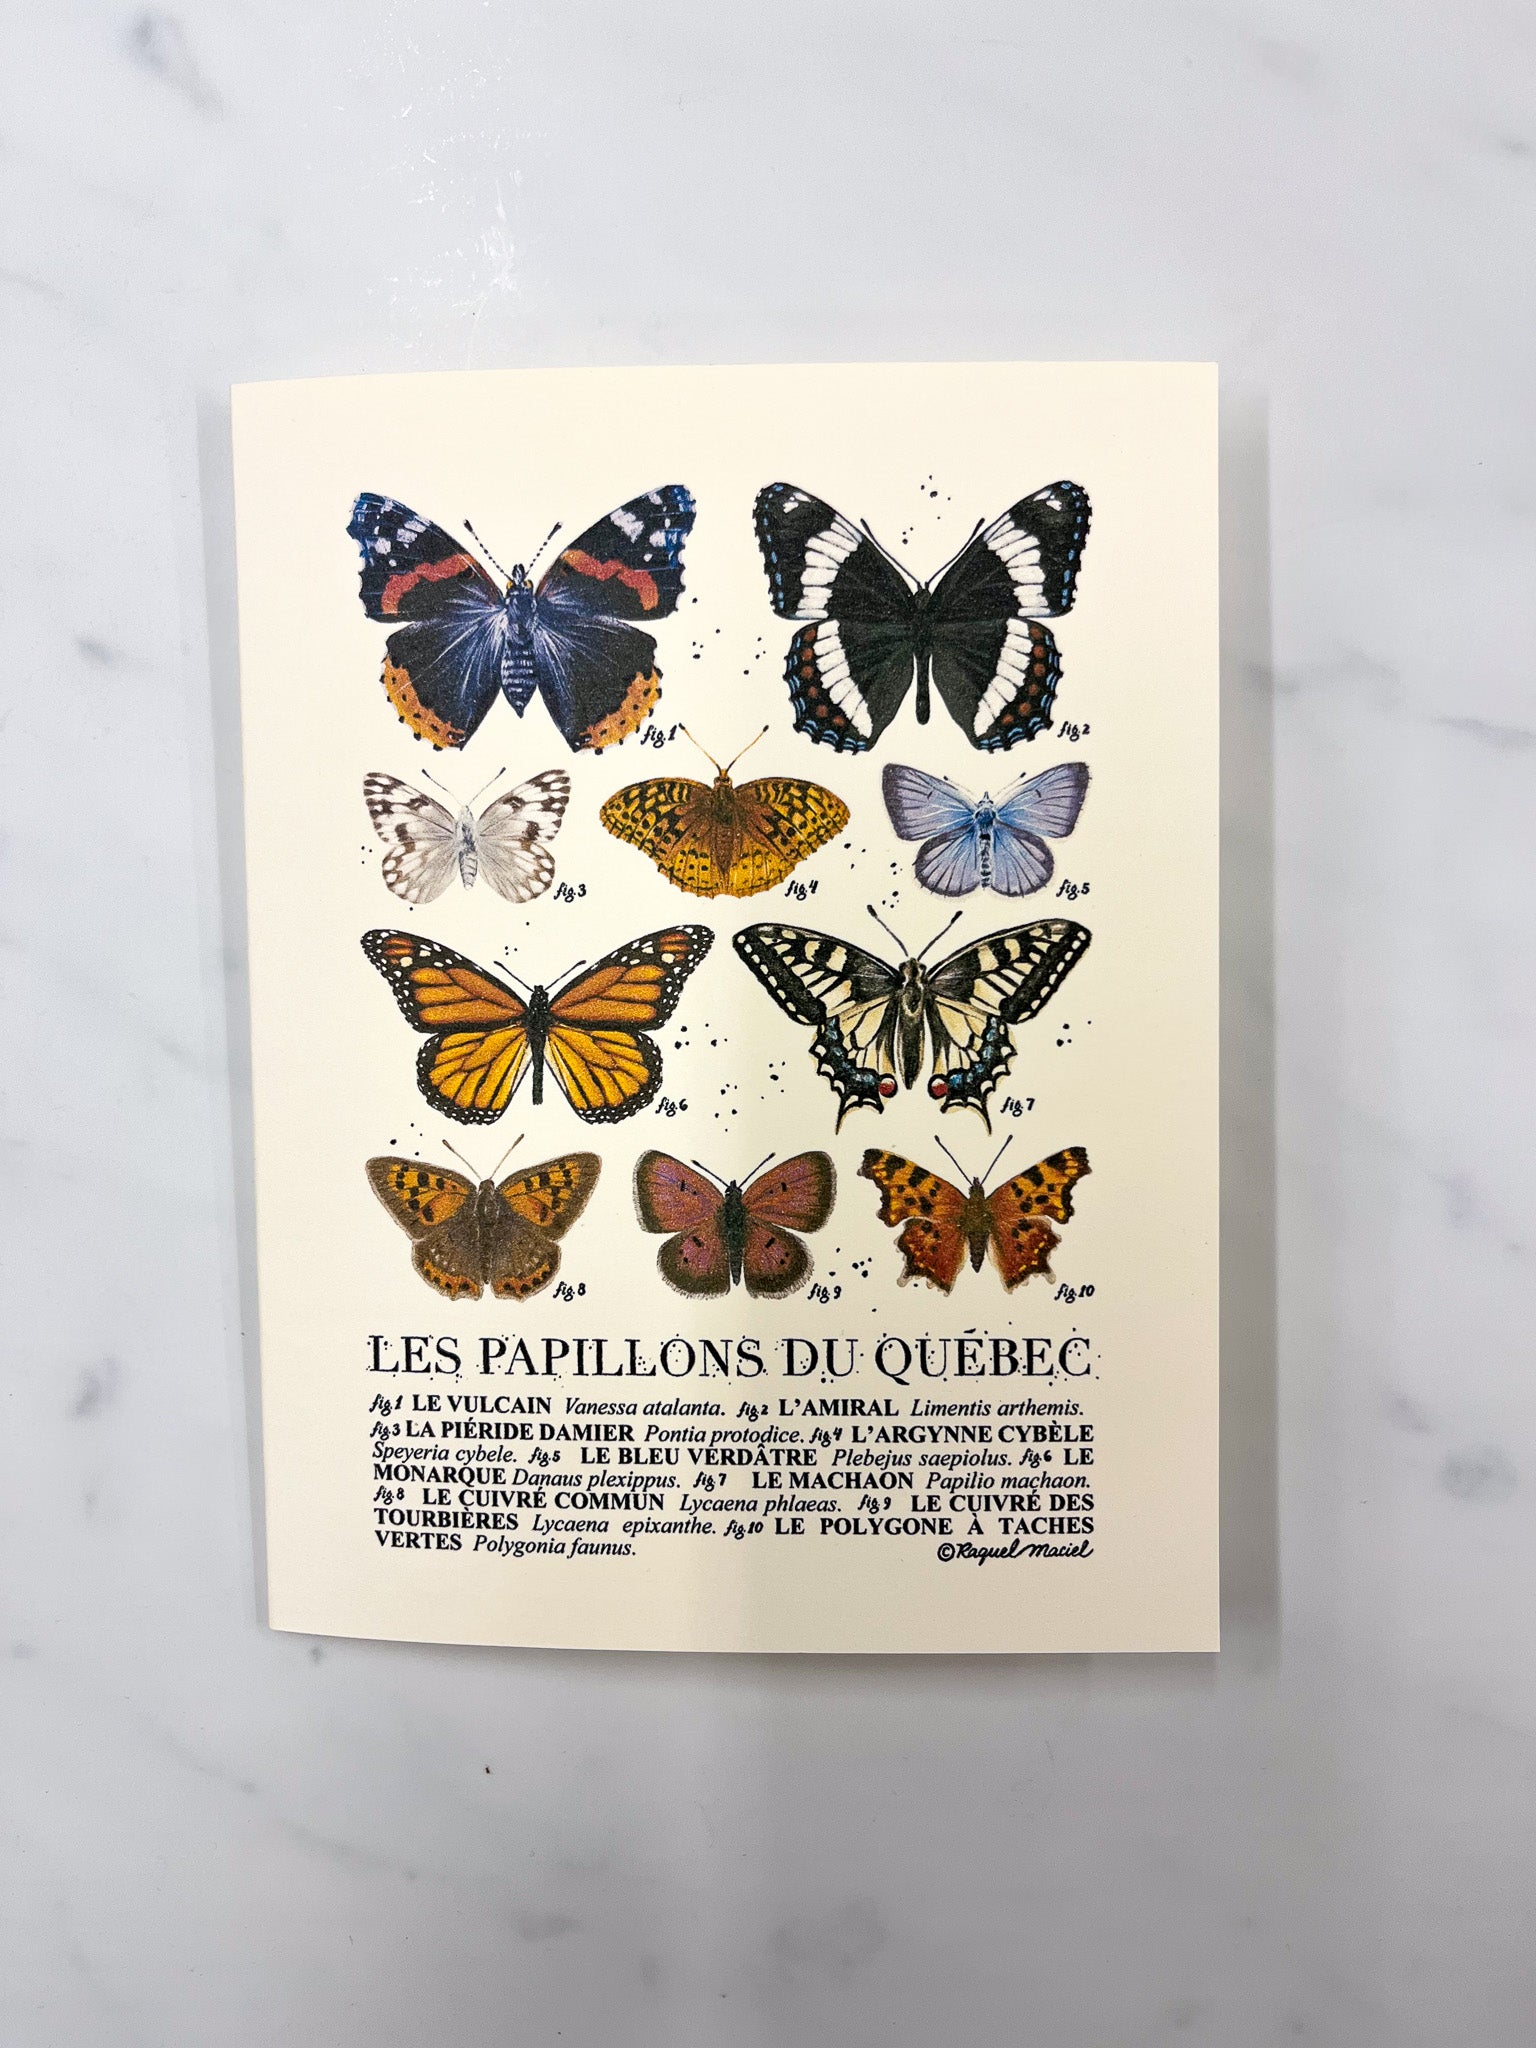 Beige card with "Les Papillons du Quebec" along with illustrations of 10 different varieties of butterflies